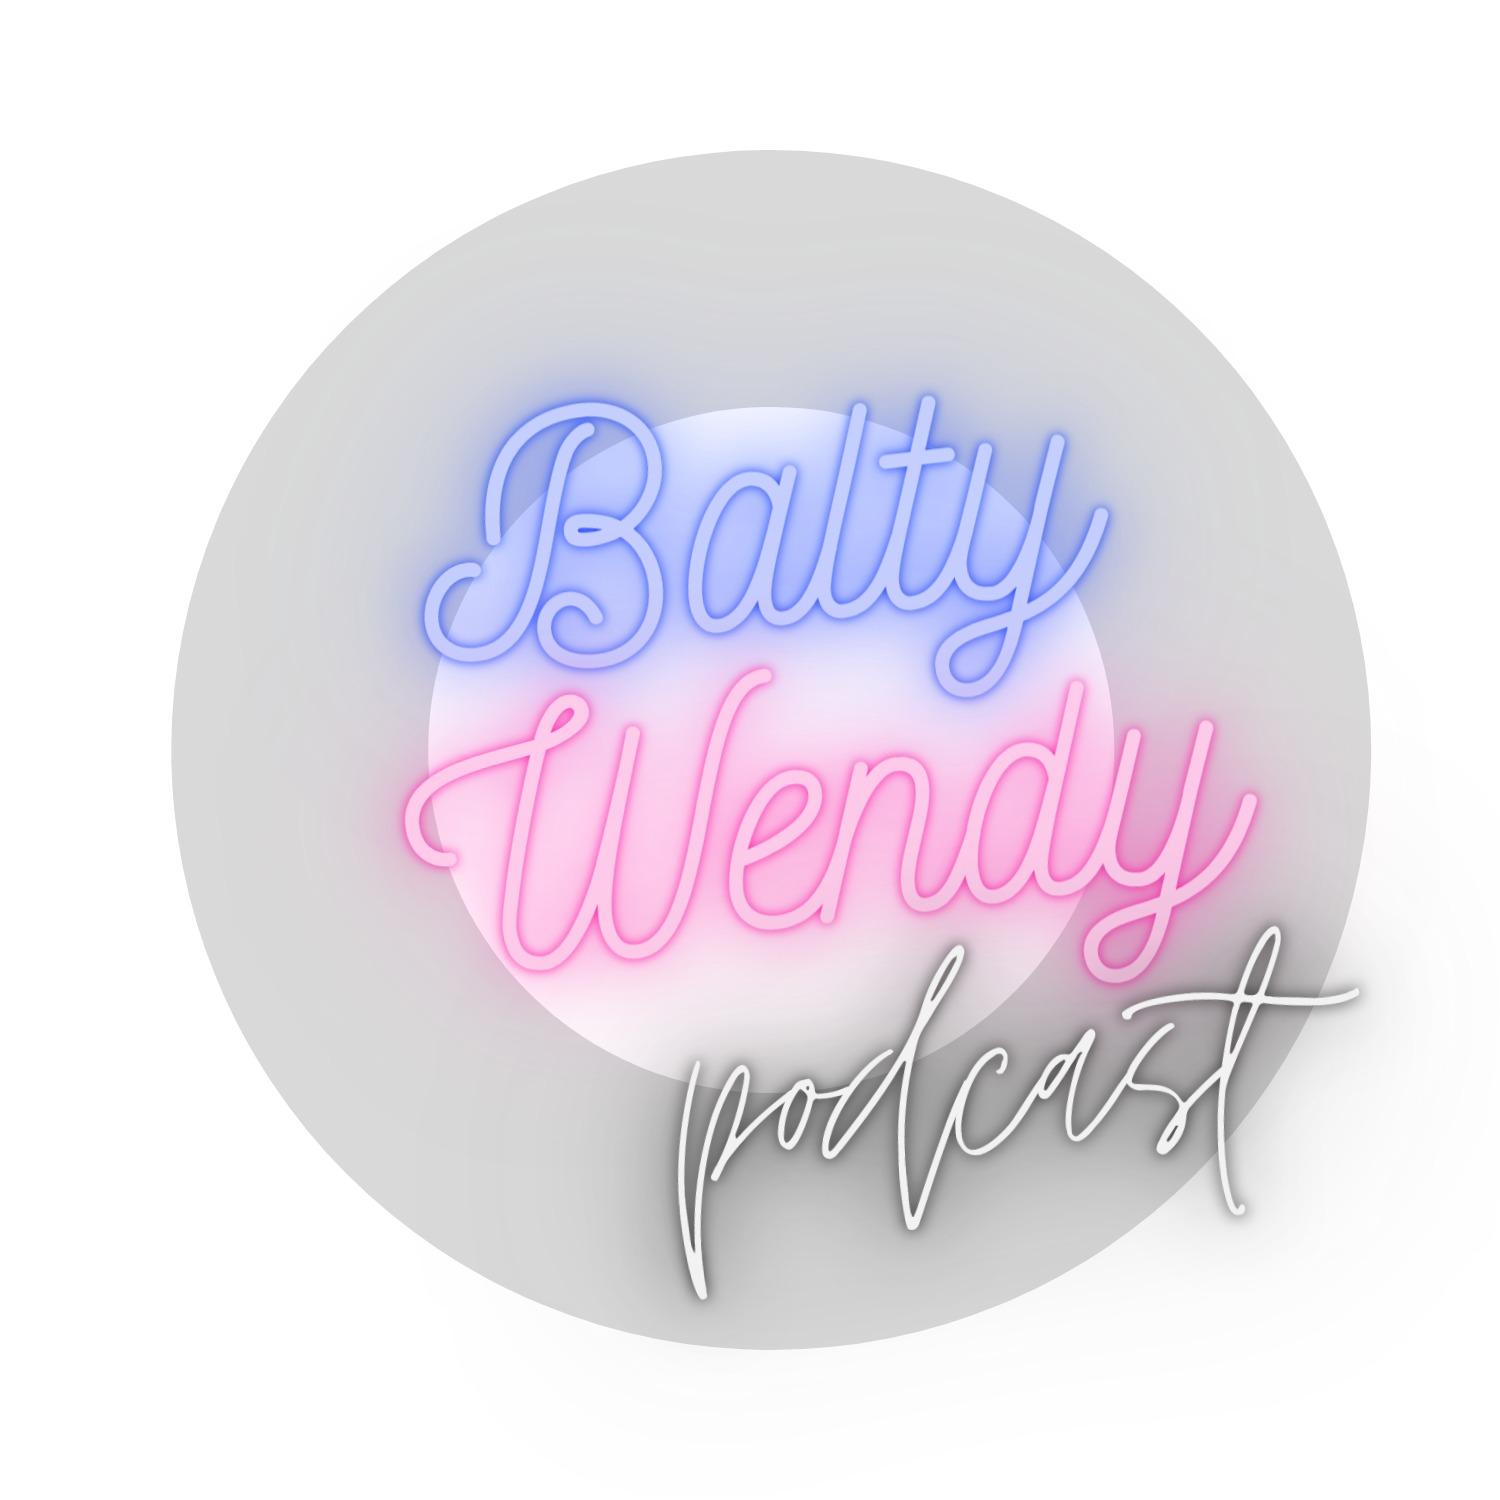 Balty & Wendy Podcast